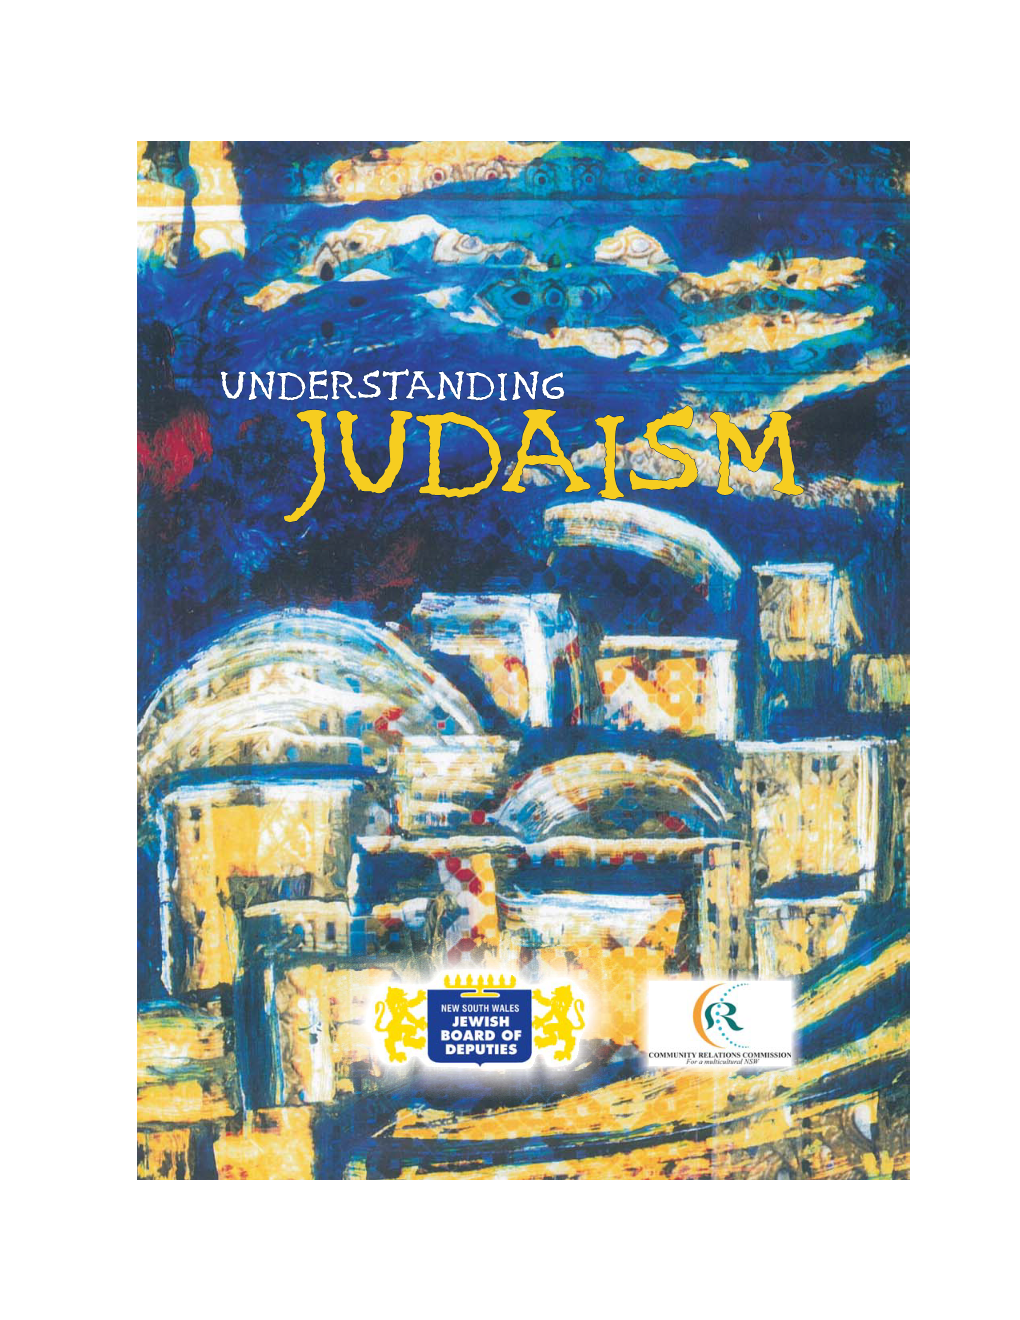 Understanding Judaism Is a Project of the New South Wales Jewish Board of Deputies – the Representative Roof-Body of the Jewish Community of New South Wales